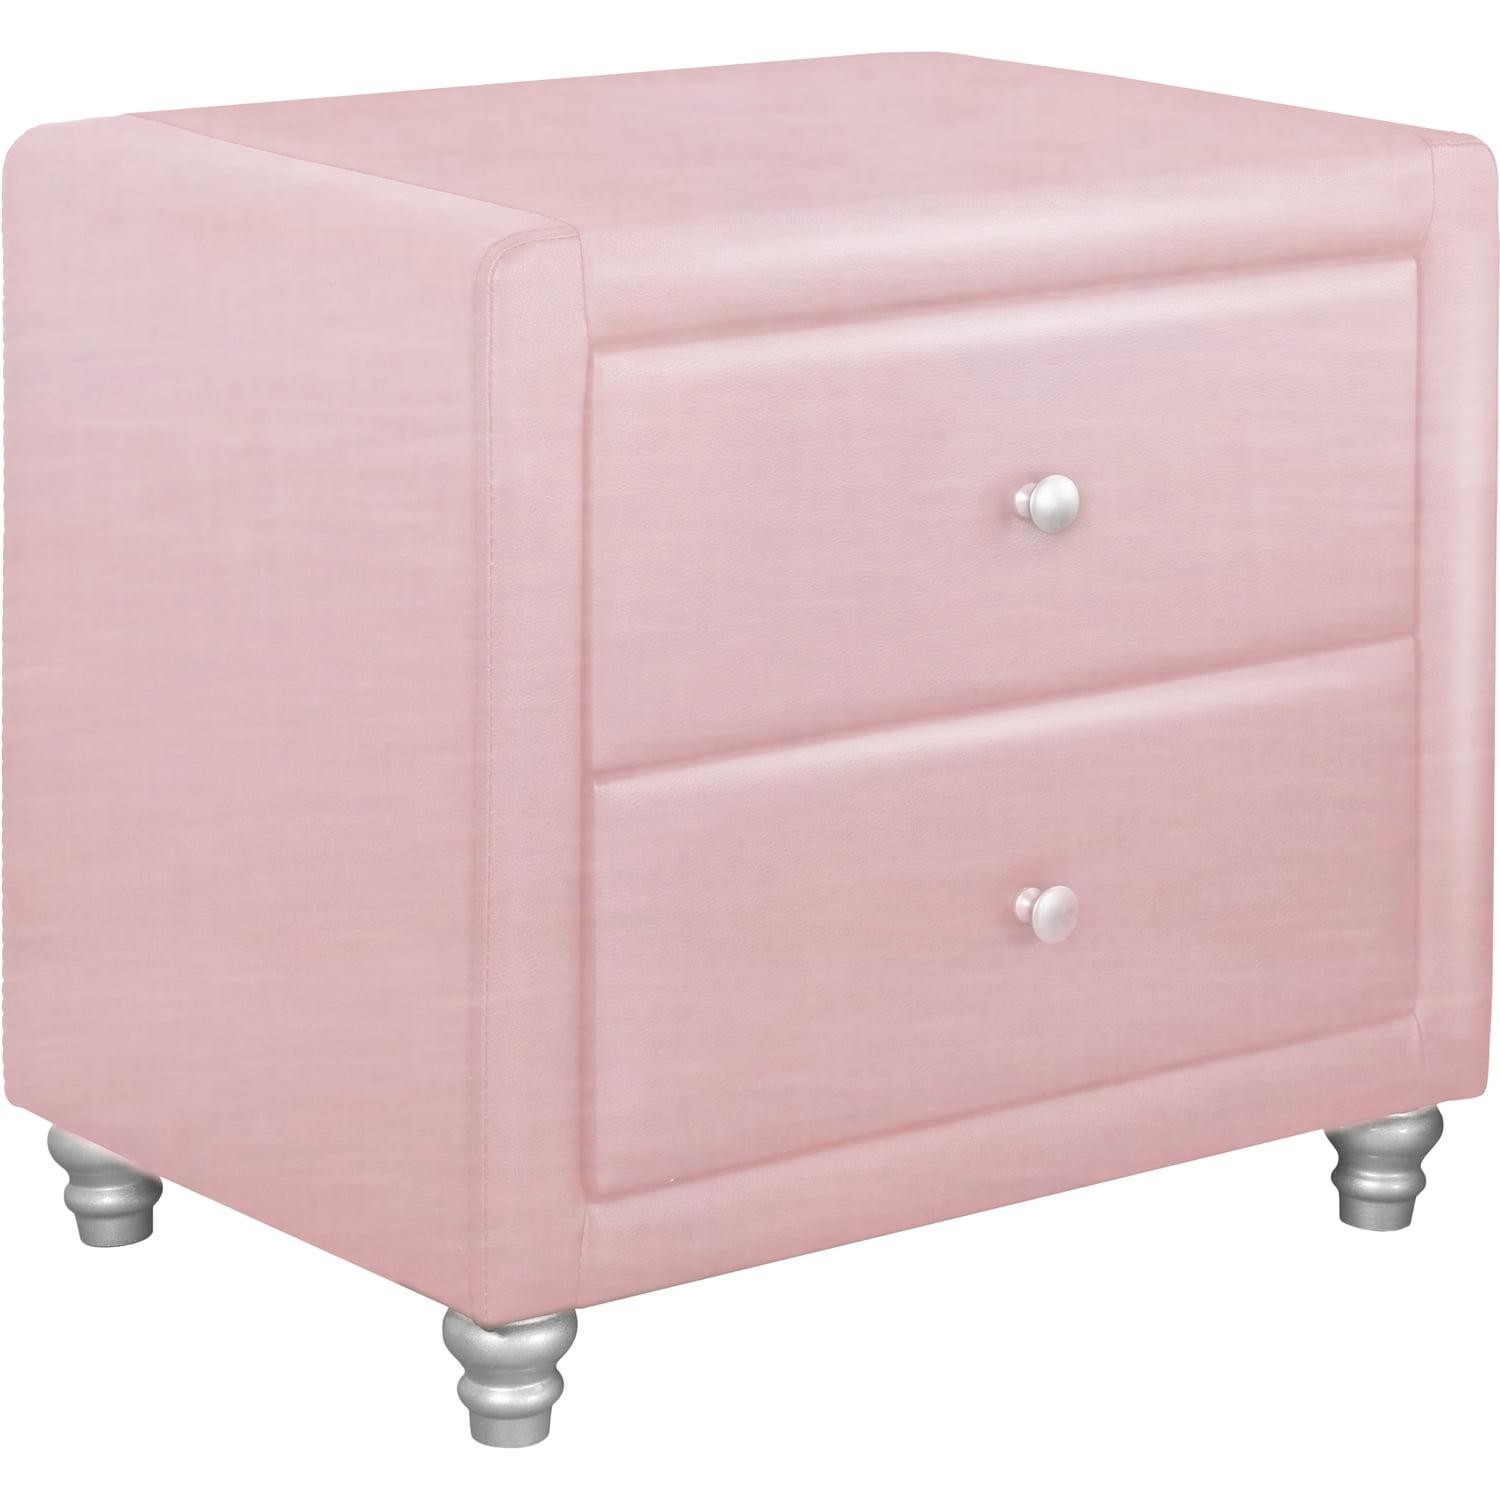 Sleek Pink Faux Leather 2-Drawer Nightstand with Brushed Nickel Accents